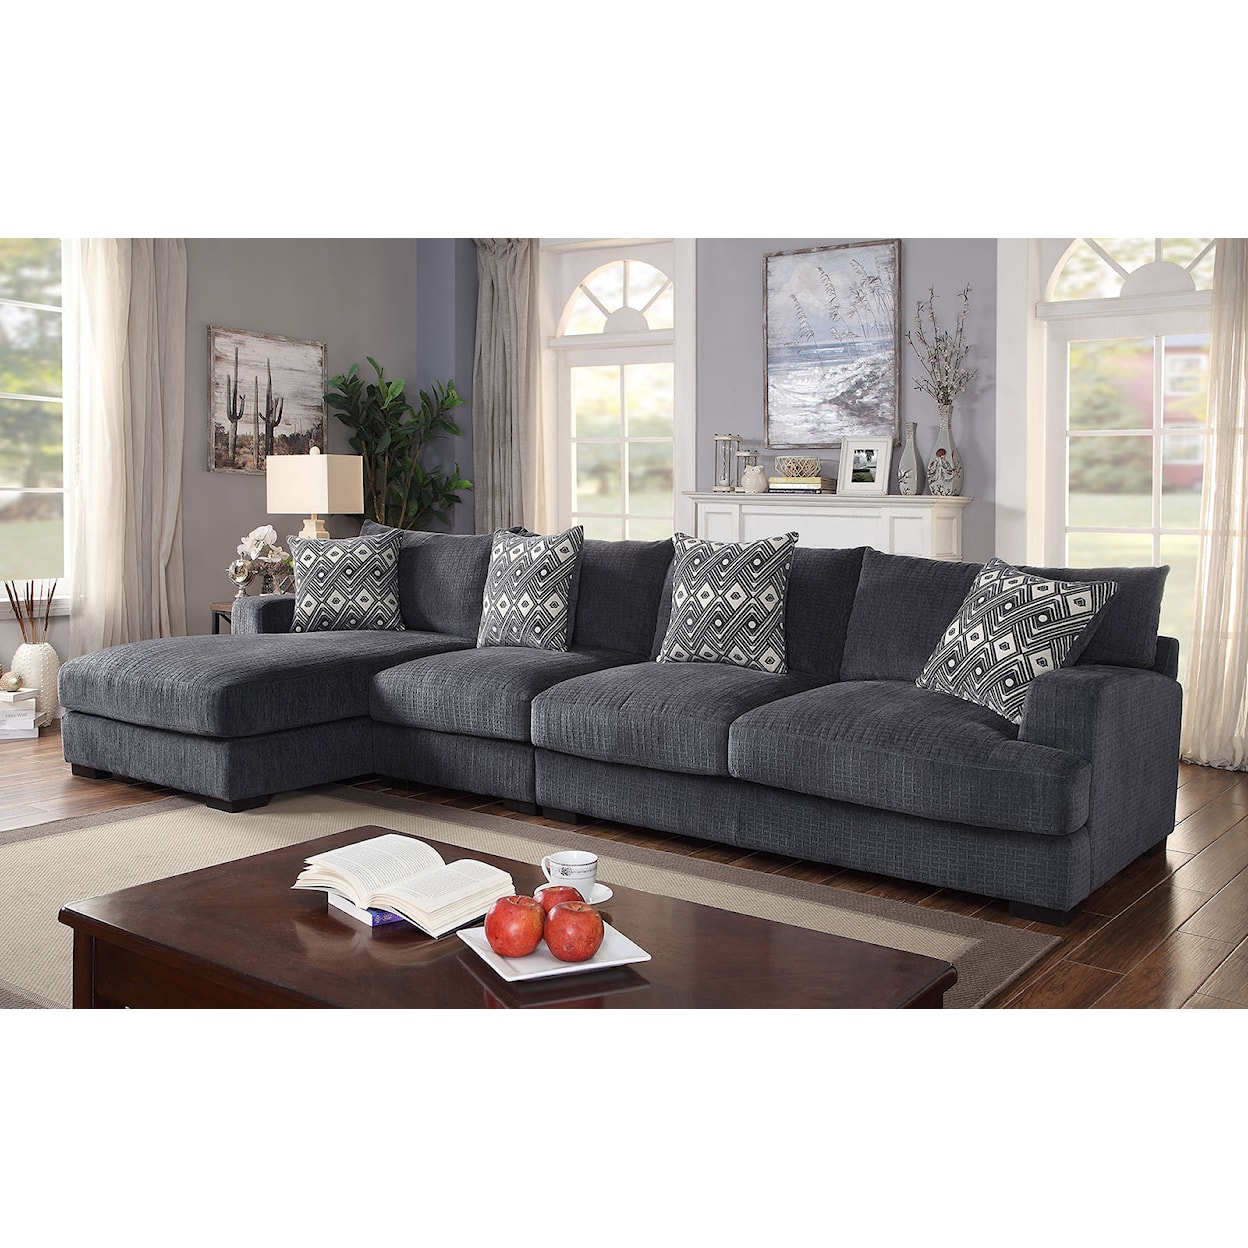 Furniture of America Kaylee Large Sofa Chaise